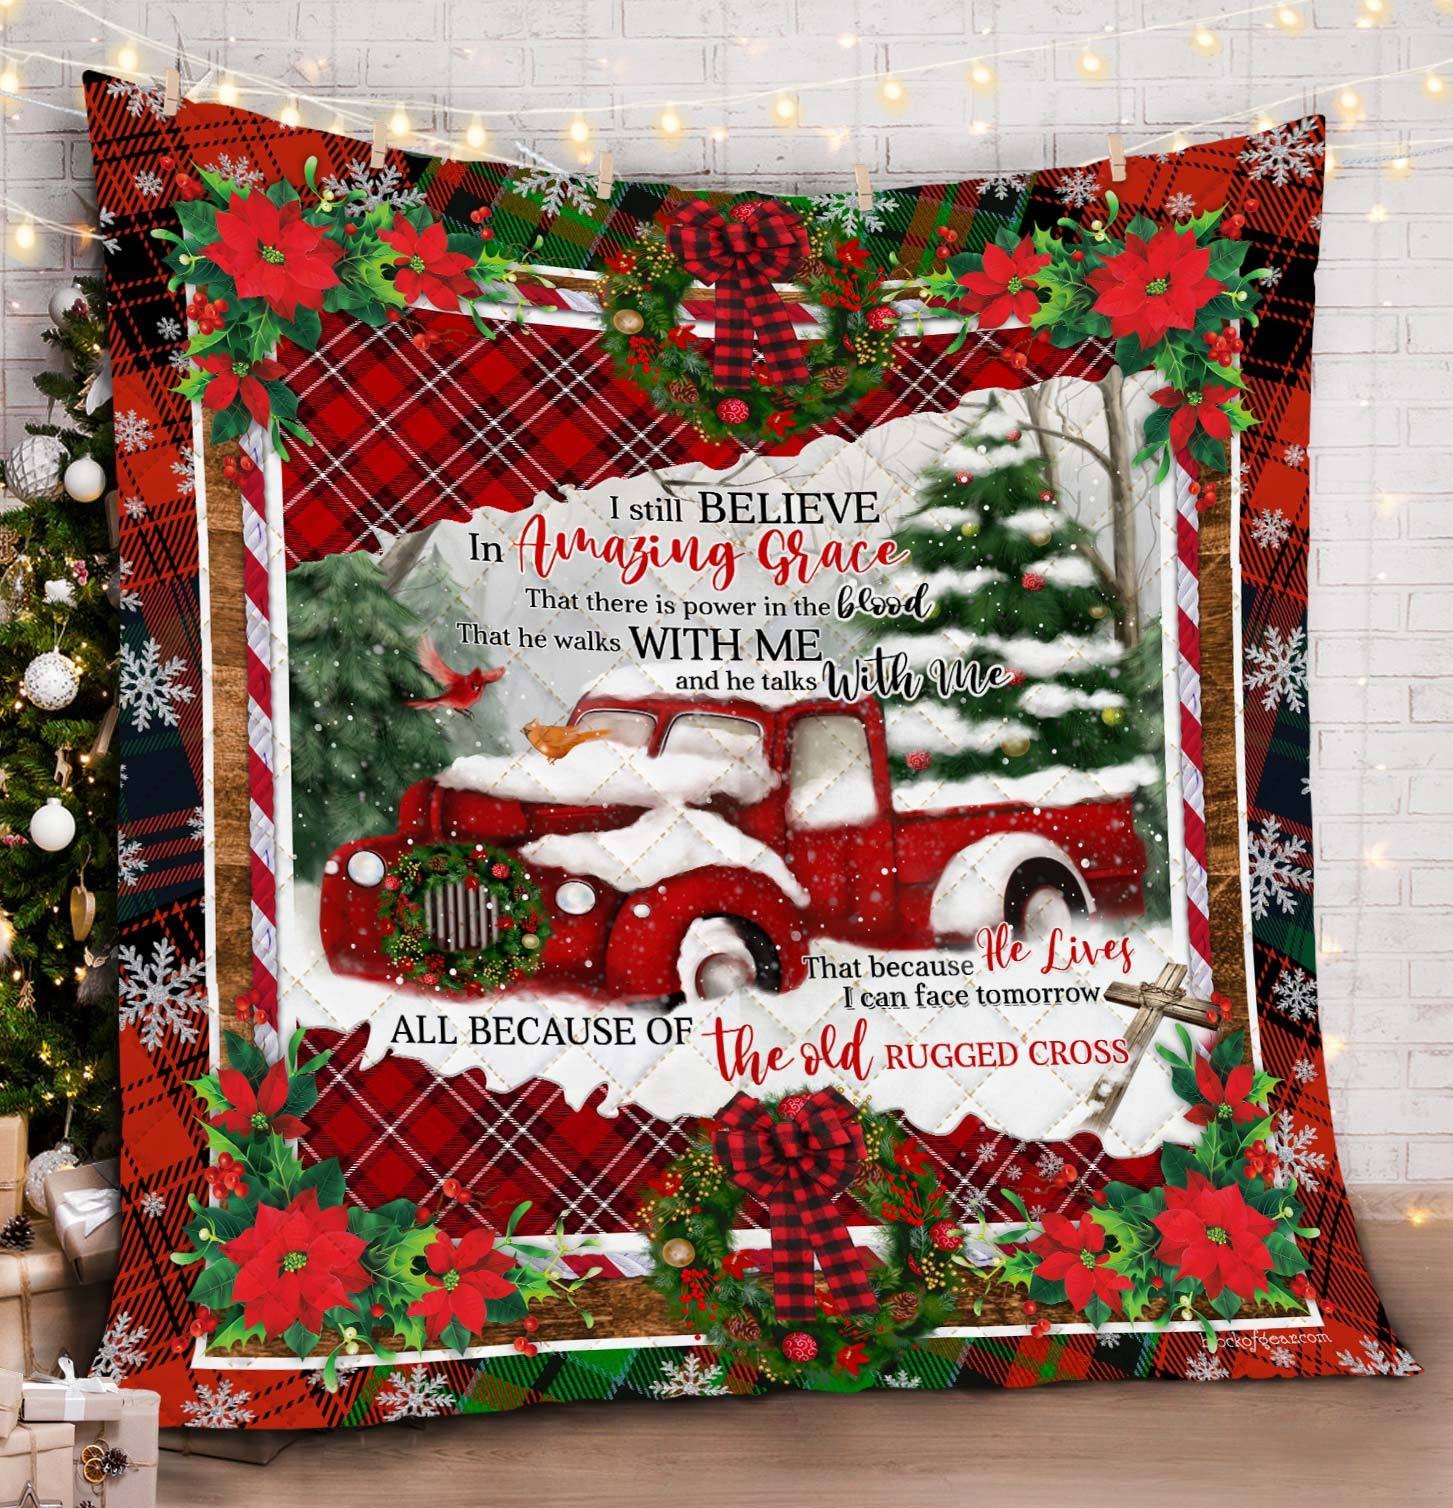 Red Truck All Because Of The Old Rugged Cross Quilt Blanket Great Customized Blanket Gifts For Birthday Christmas Thanksgiving